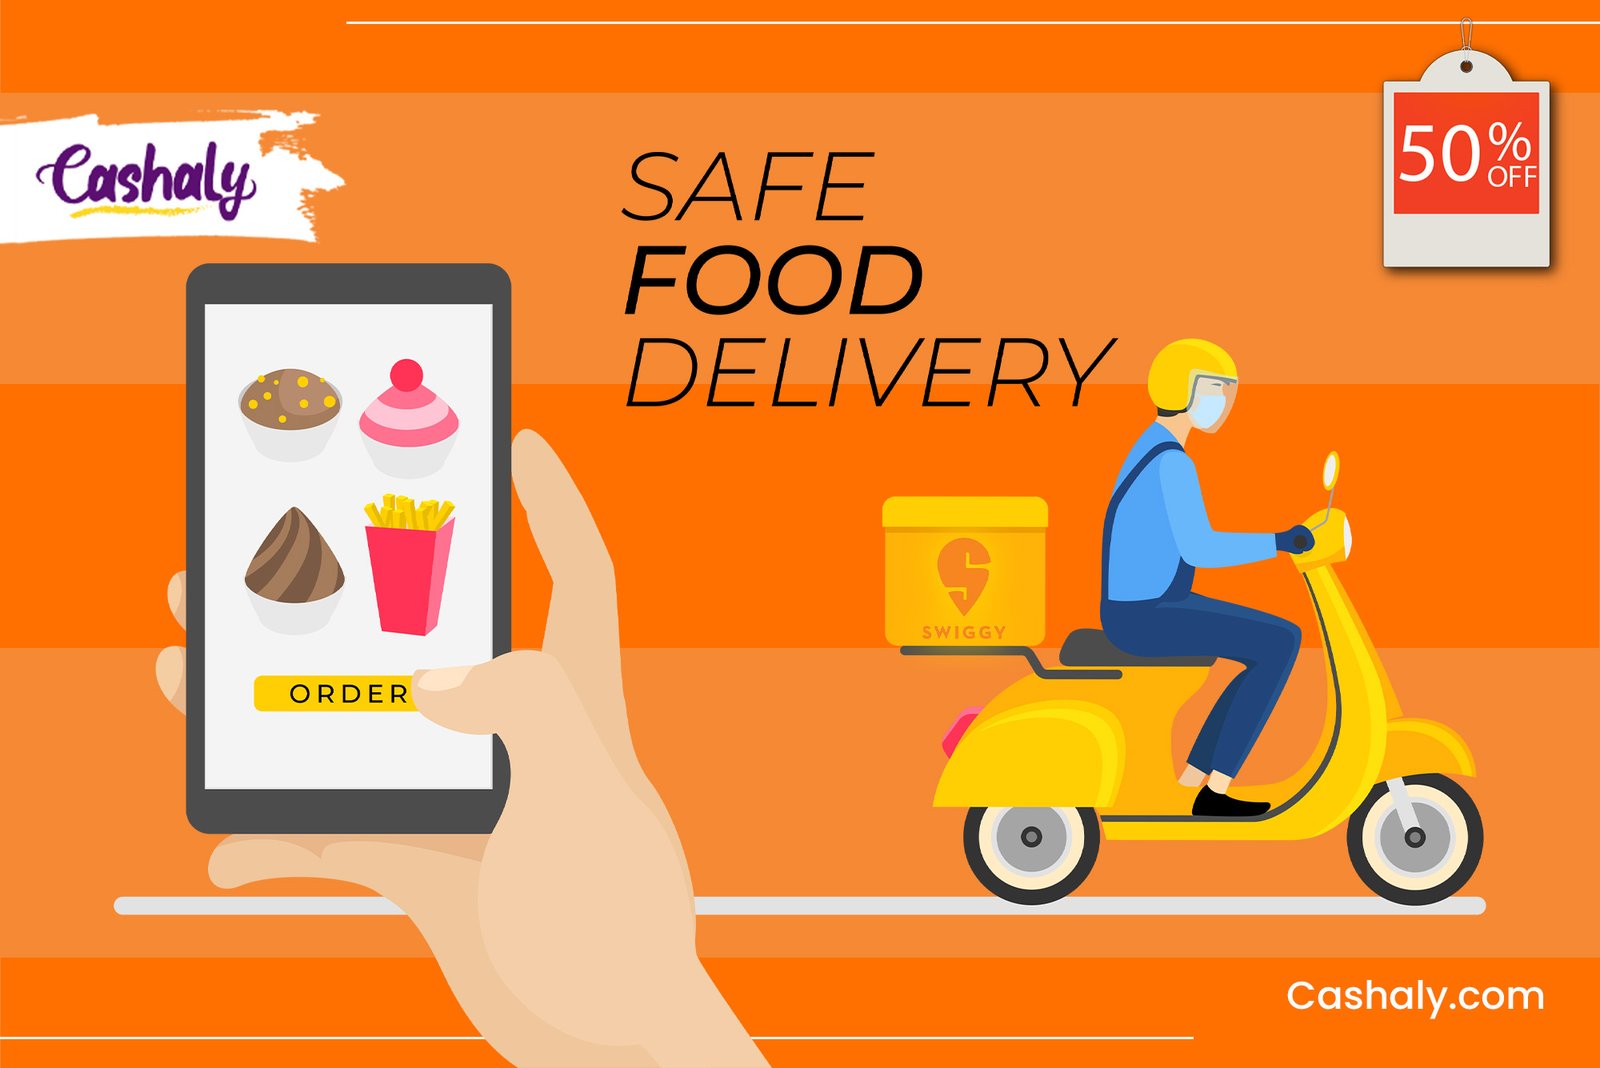 How Is Swiggy Revolutionizing Online Food Delivery?